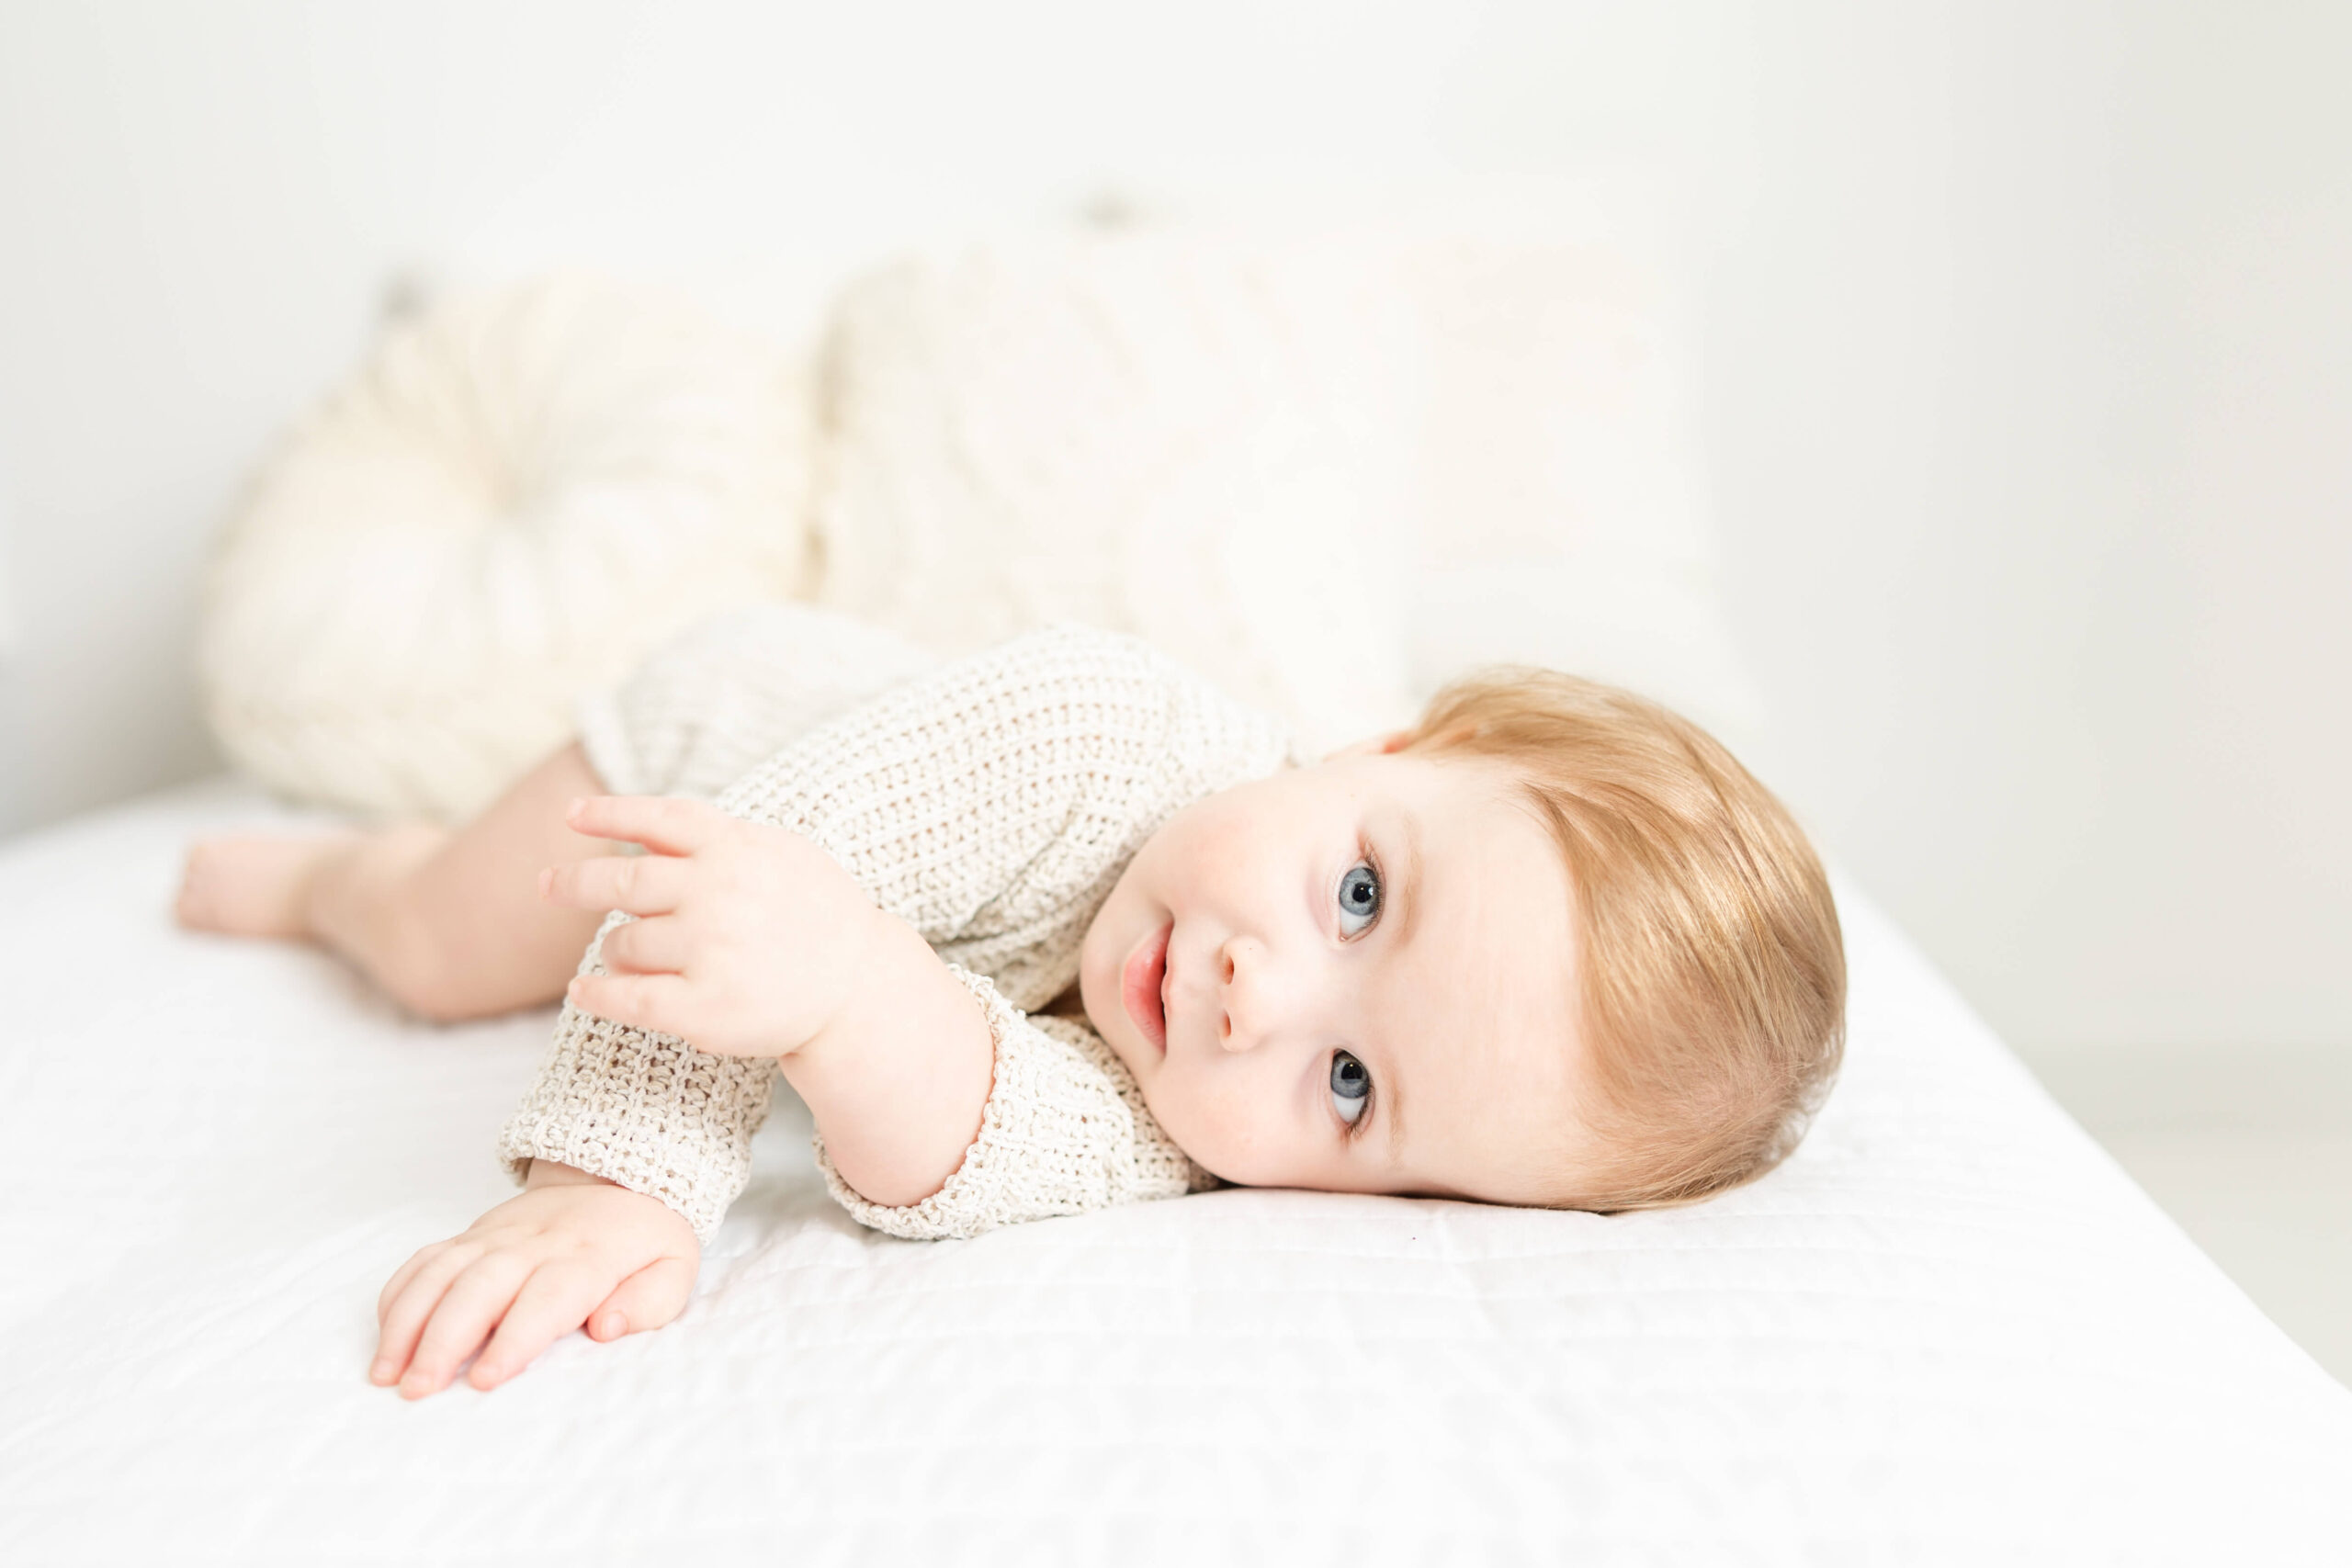 One year old laying on bed during his milestone session in the studio of molly berry photography.